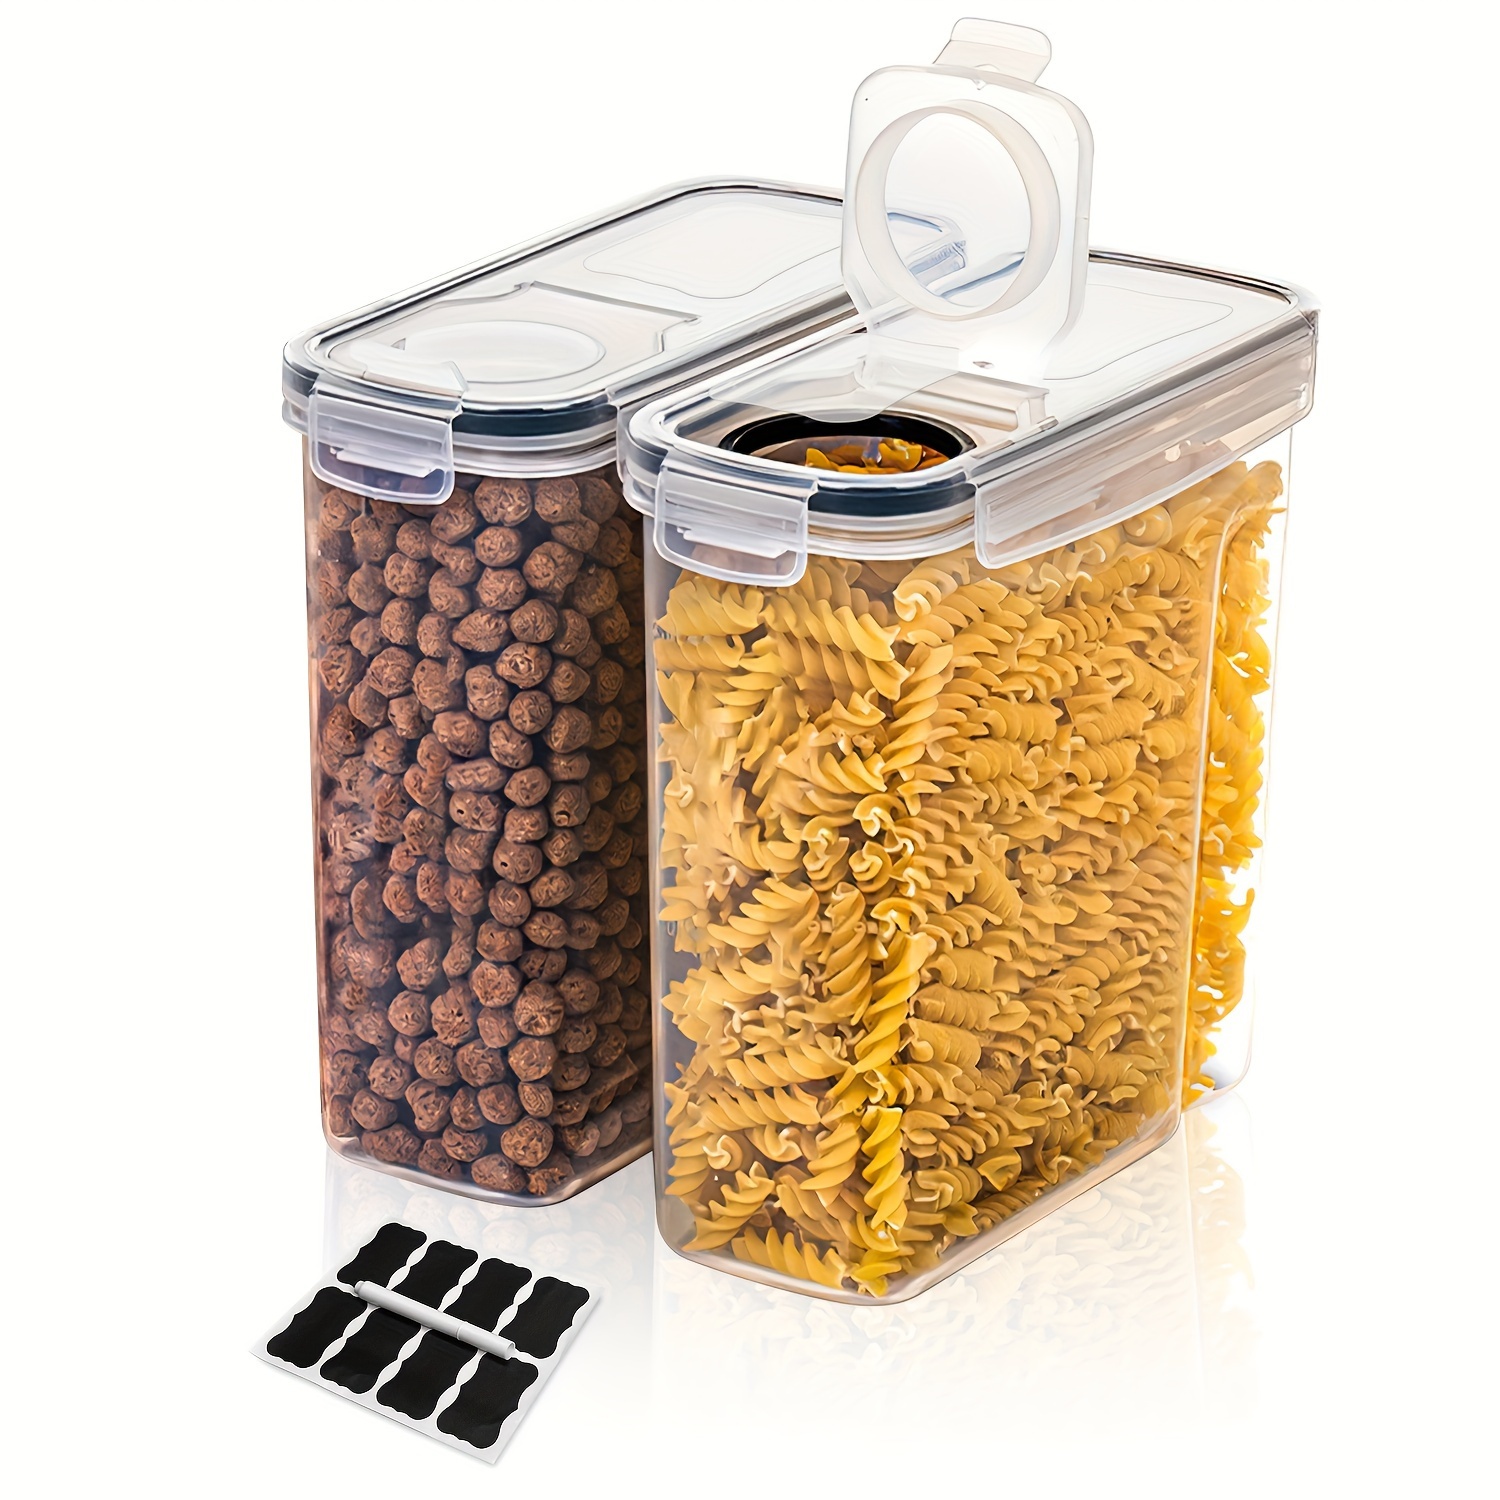 4-Piece/4L Airtight Food Storage Containers Set for Kitchen and Pantry